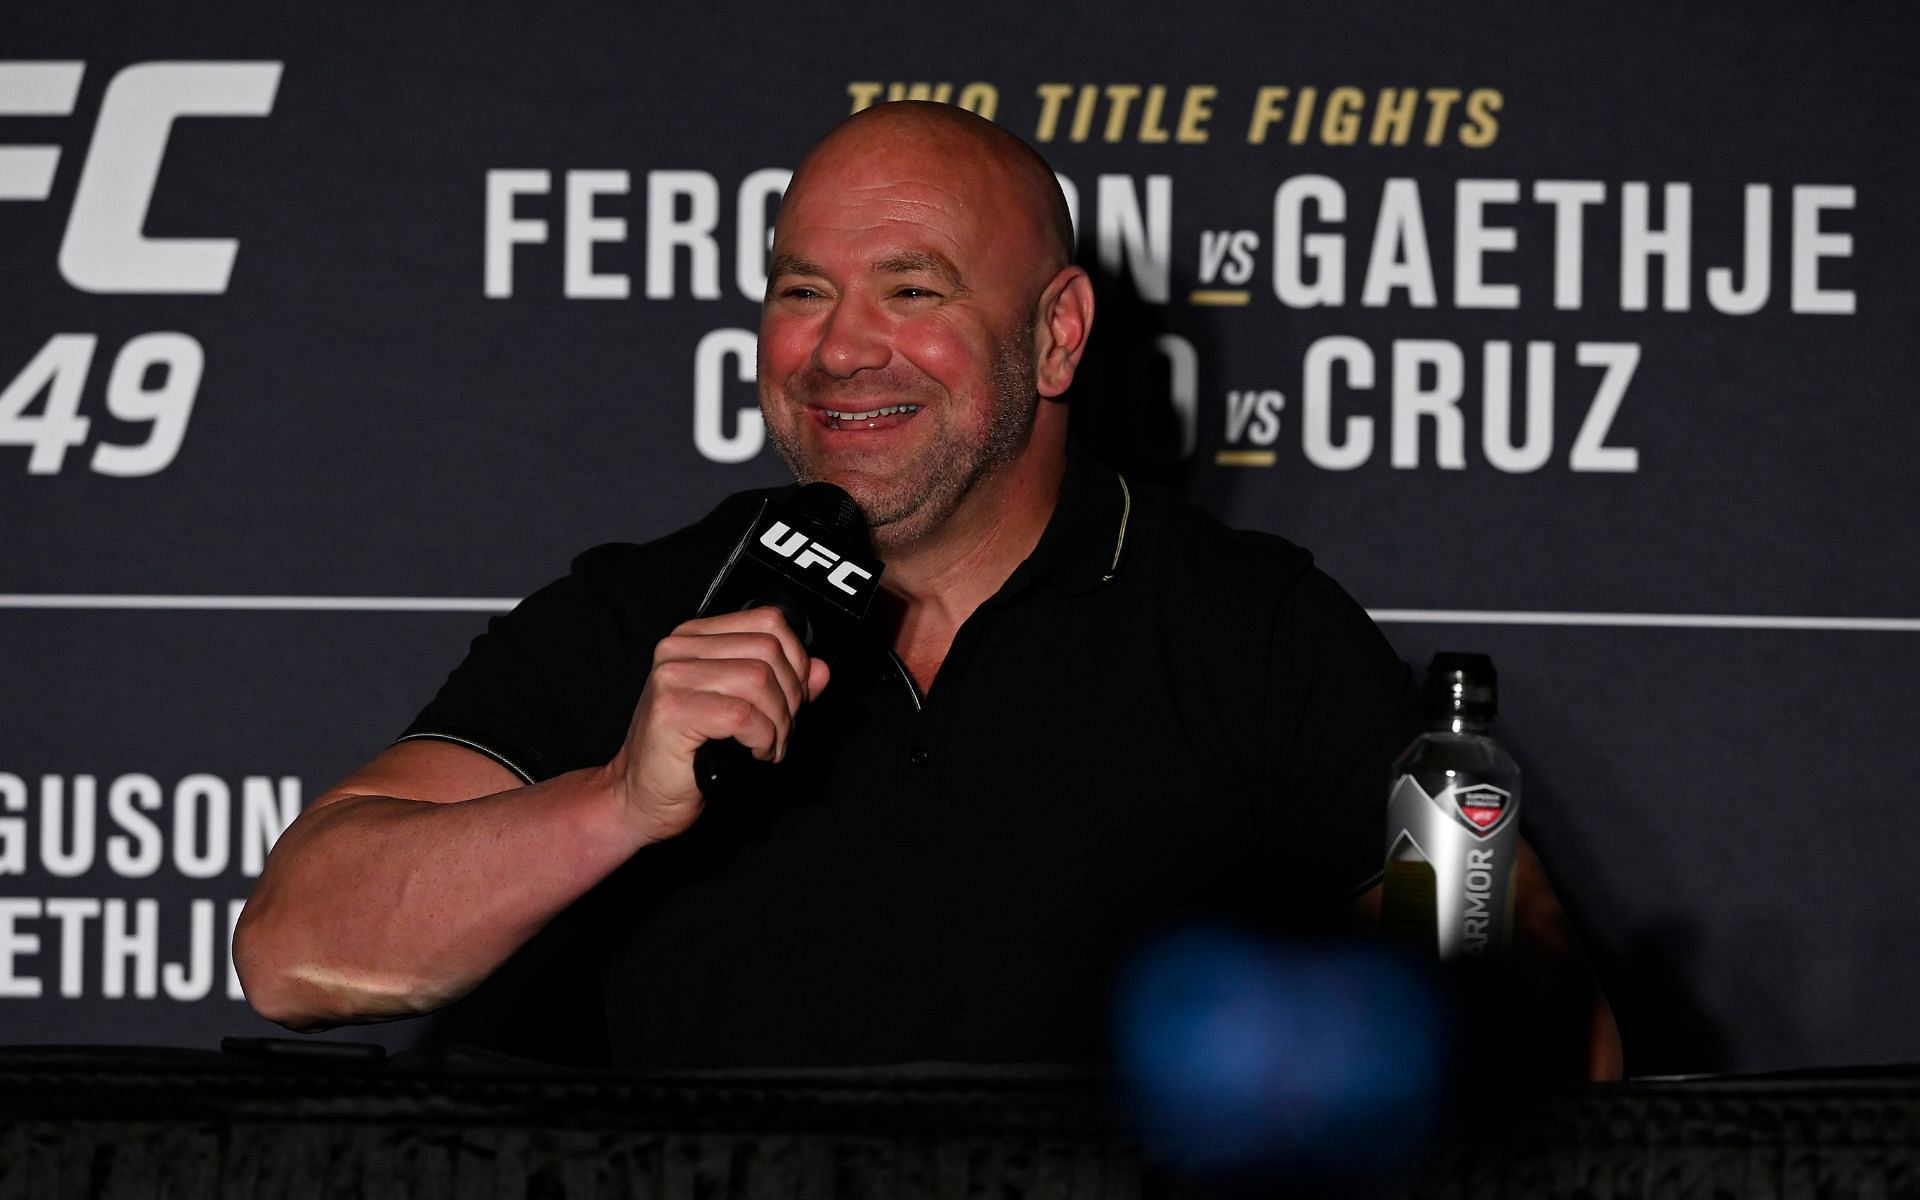 Dana White speaks to the media after UFC 249 at VyStar Veterans Memorial Arena in Florida